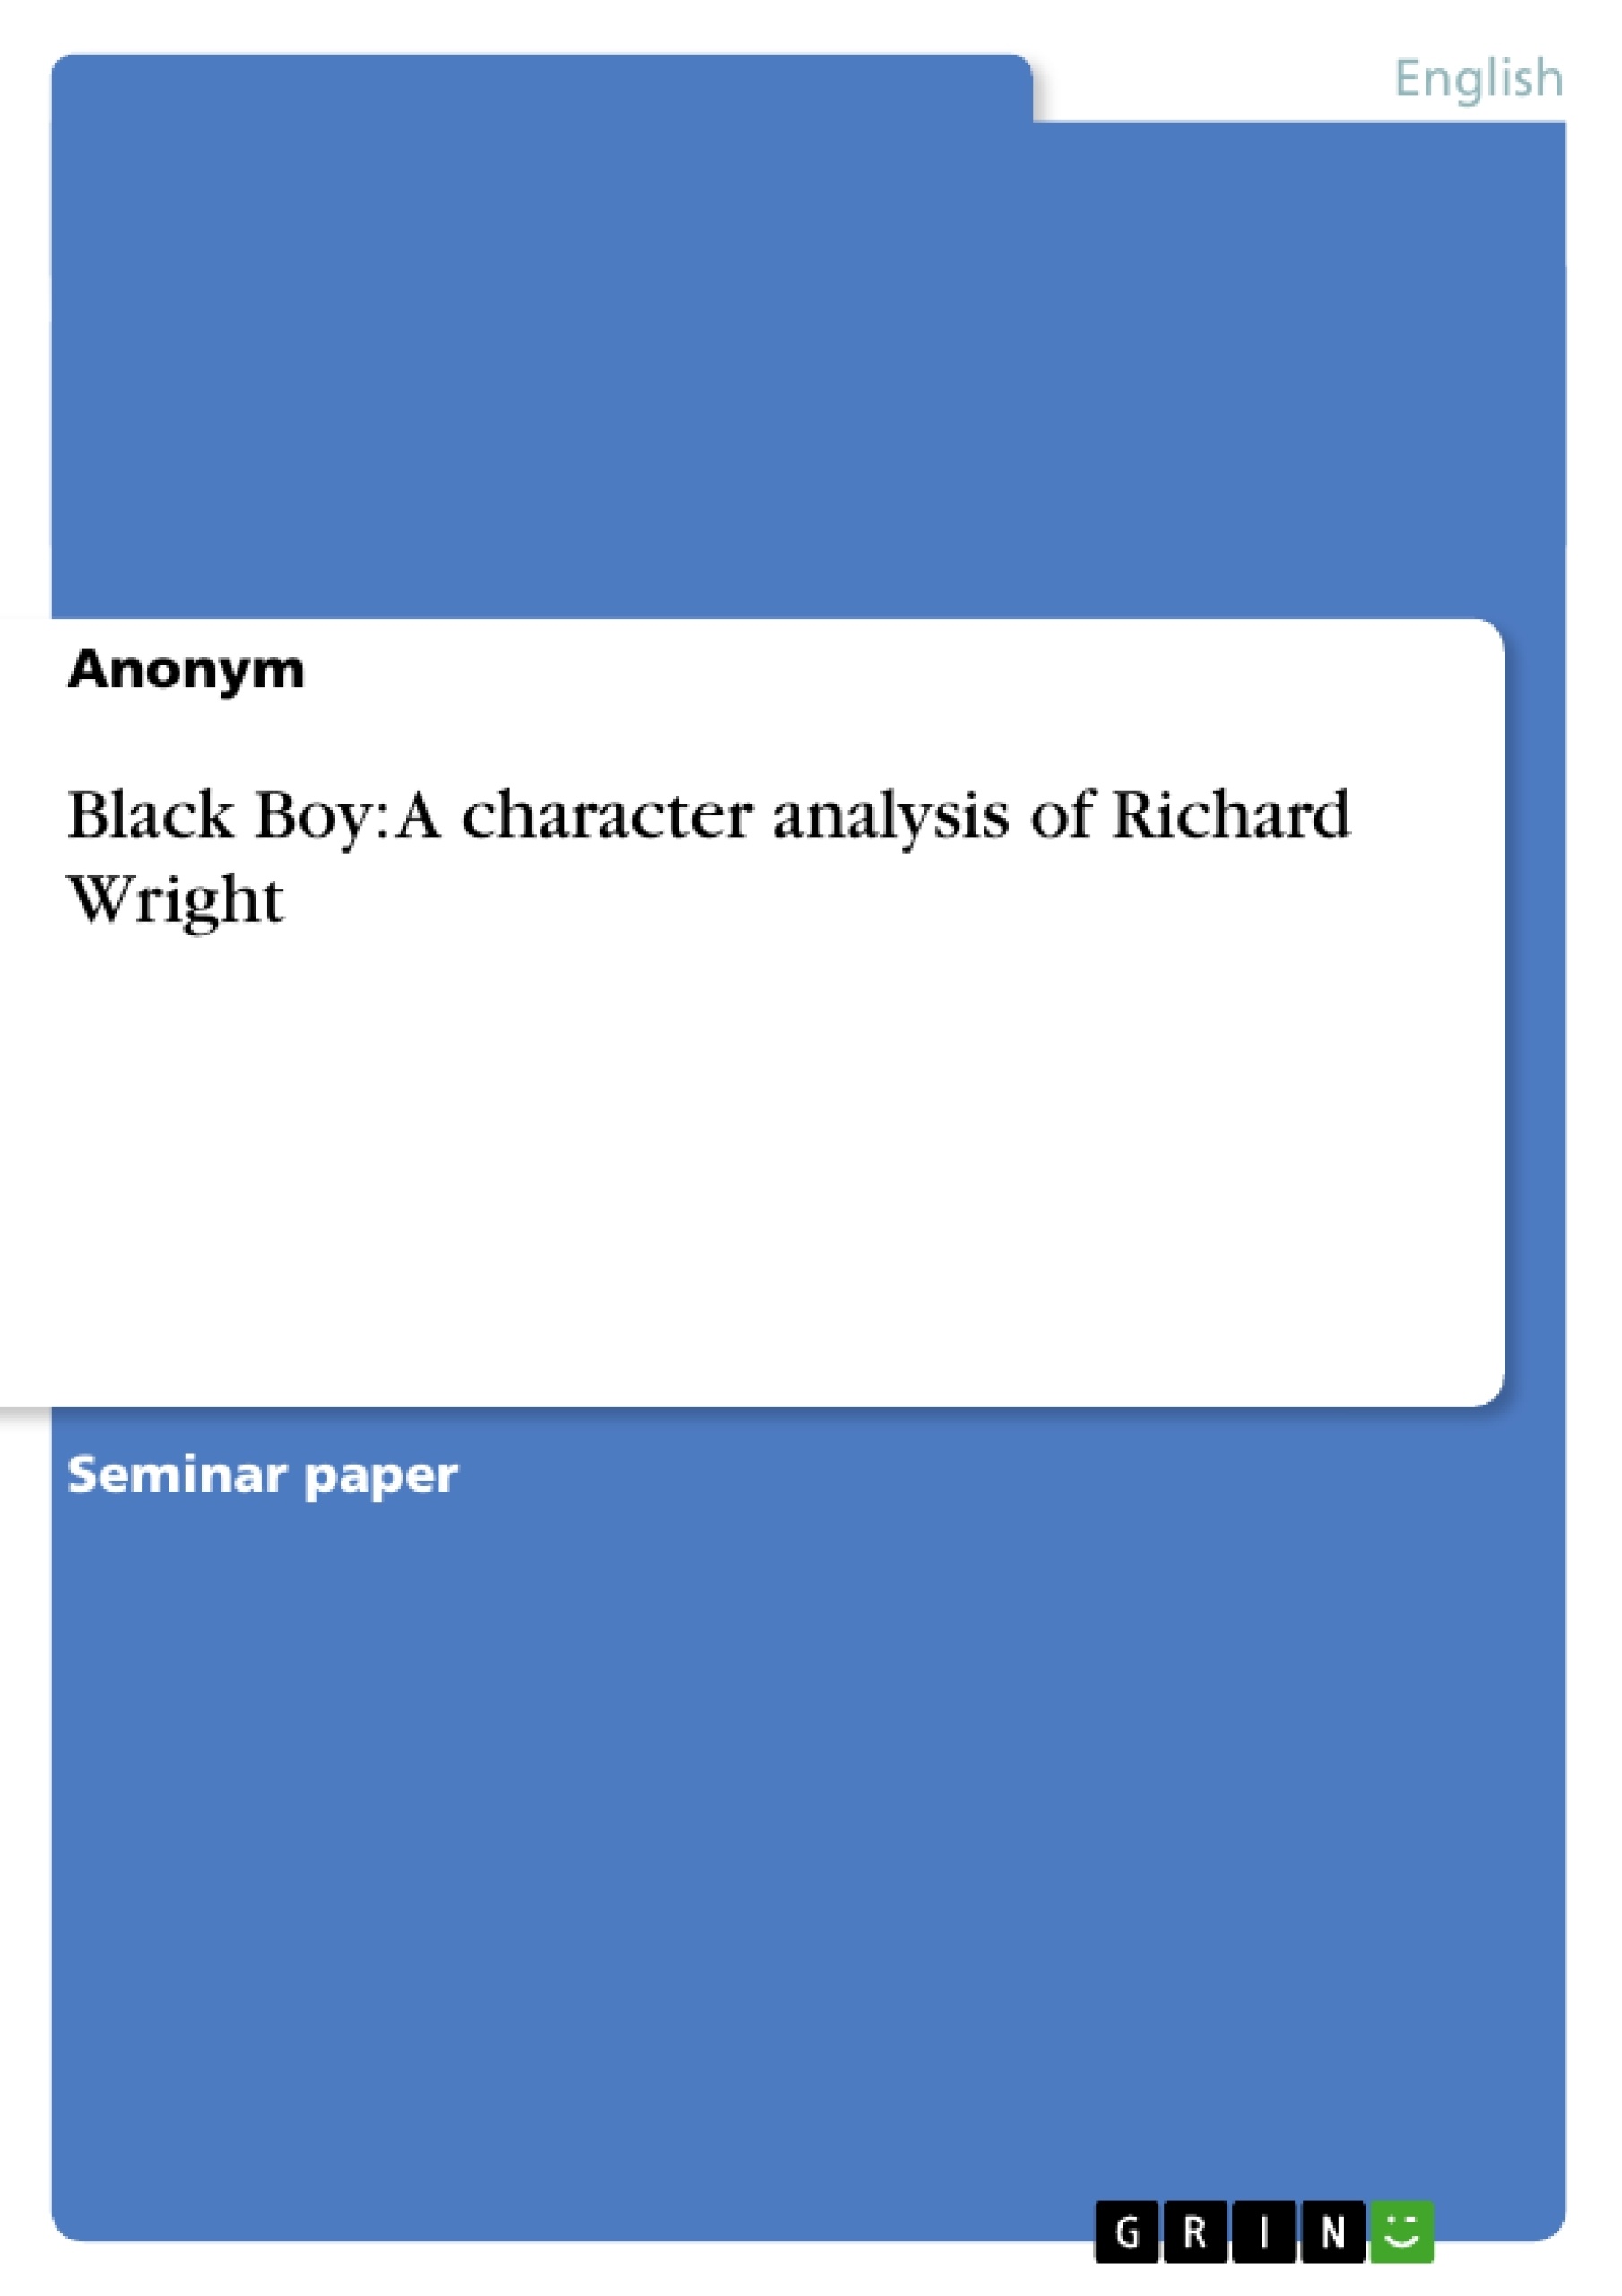 Black Boy A Character Analysis Of Richard Wright - Grin